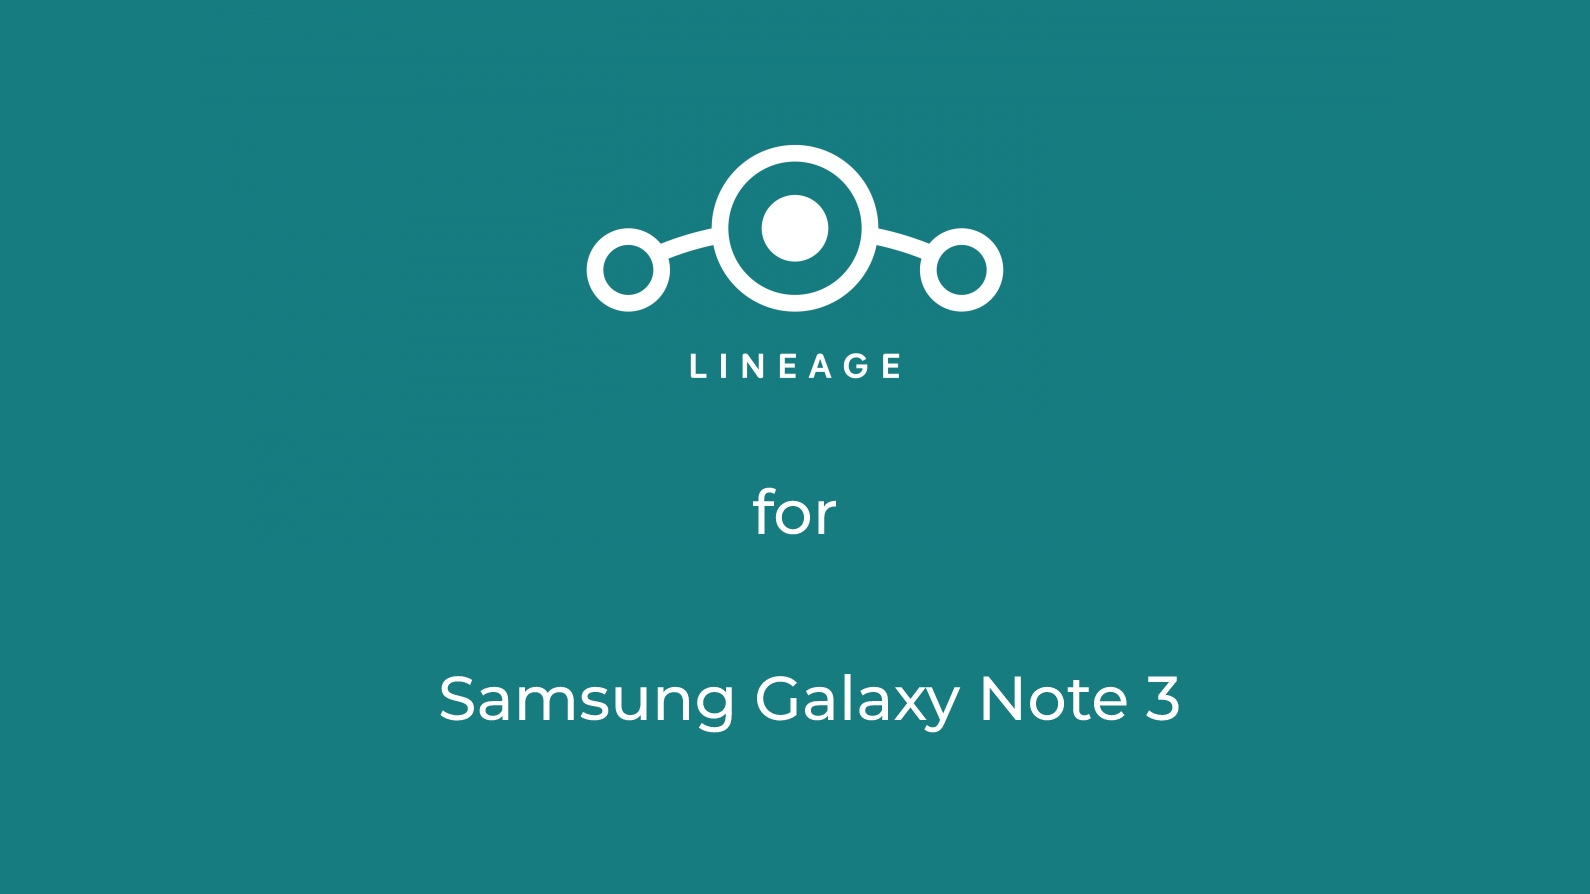 Download LineageOS 18.1 for Samsung Galaxy Note 3